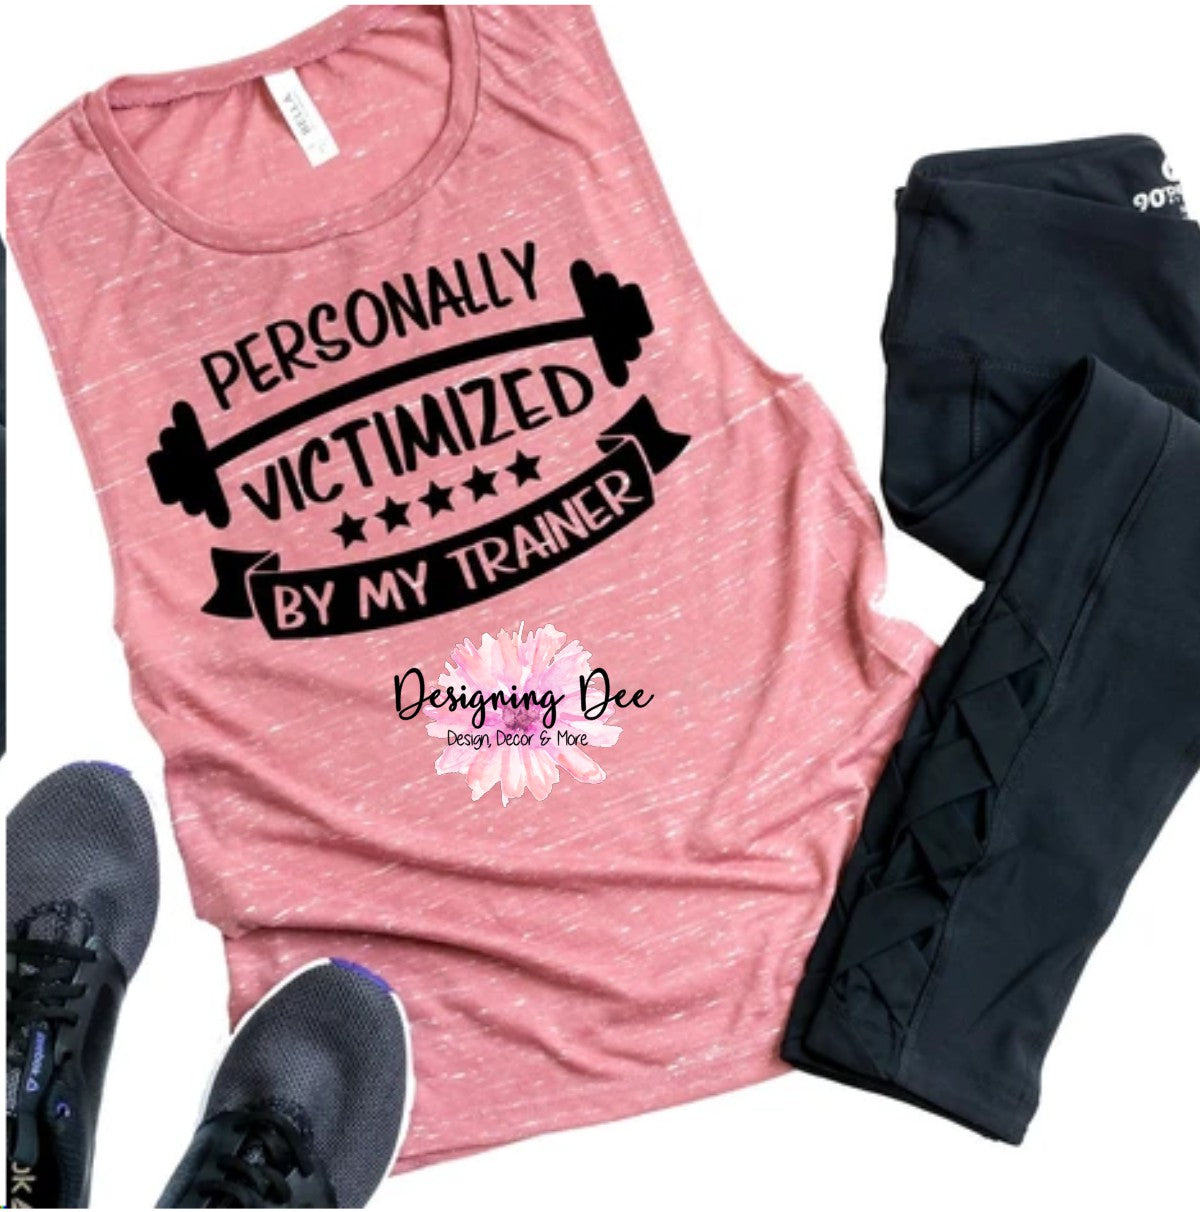 Victimized By My Trainer Women’S Workout Shirt